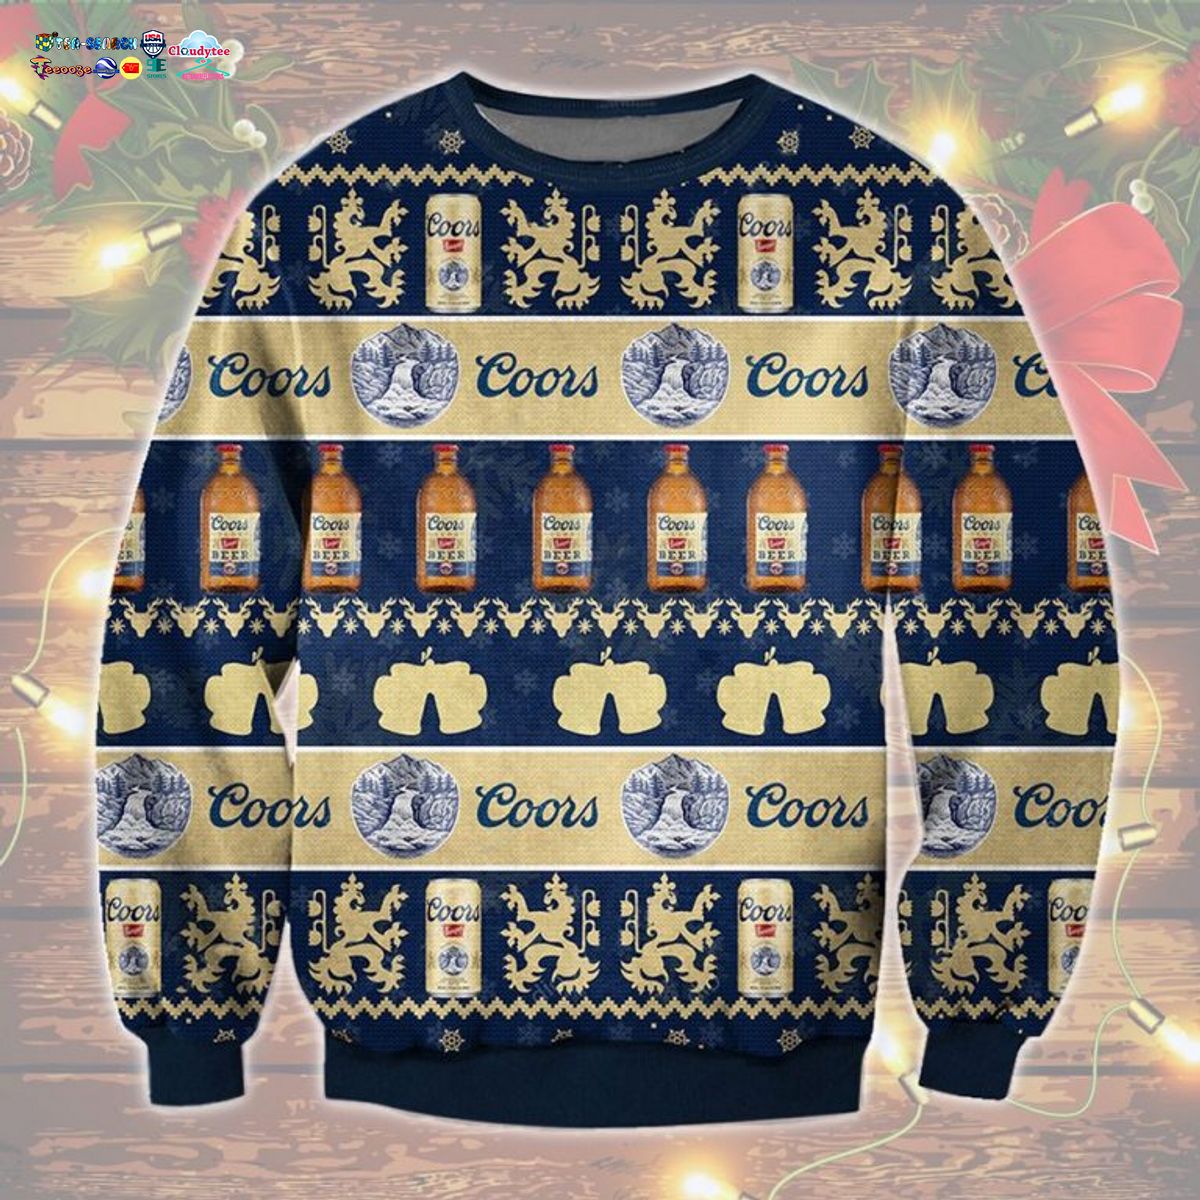 Coors Banquet Ugly Christmas Sweater - It is more than cute